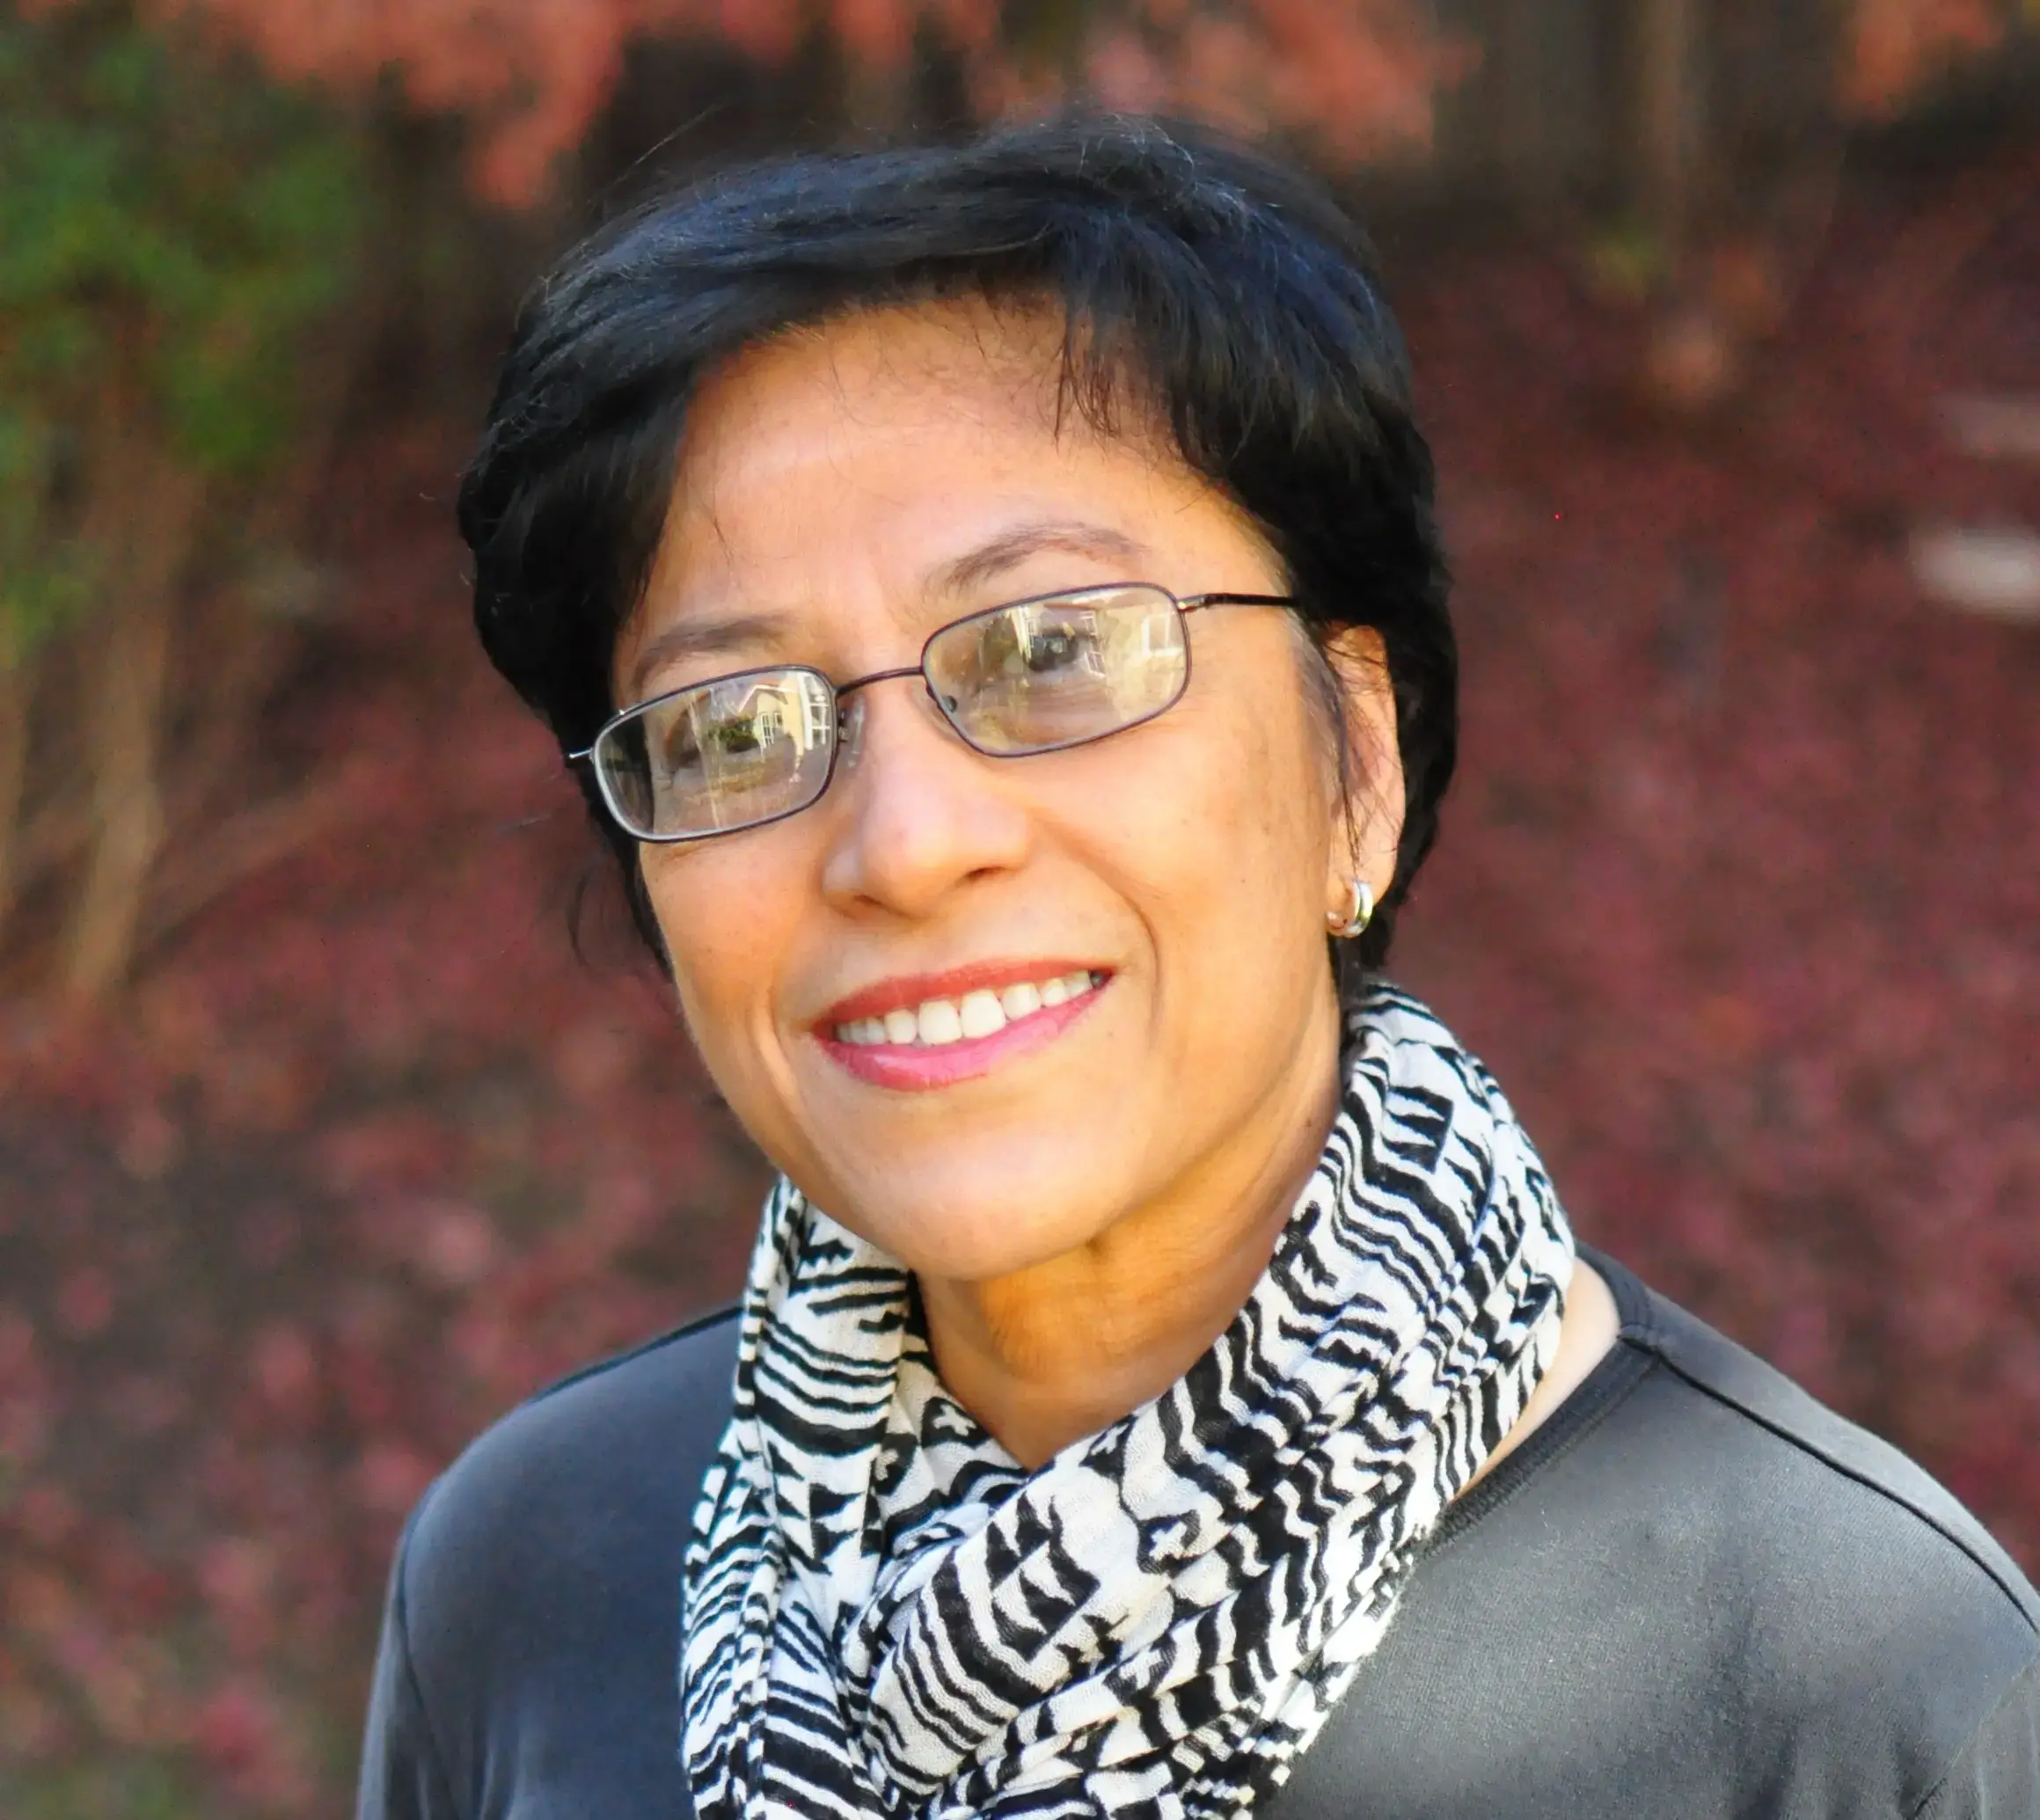 Woman with glasses wearing a gray shirt and patterned scarf smiling for a picture.